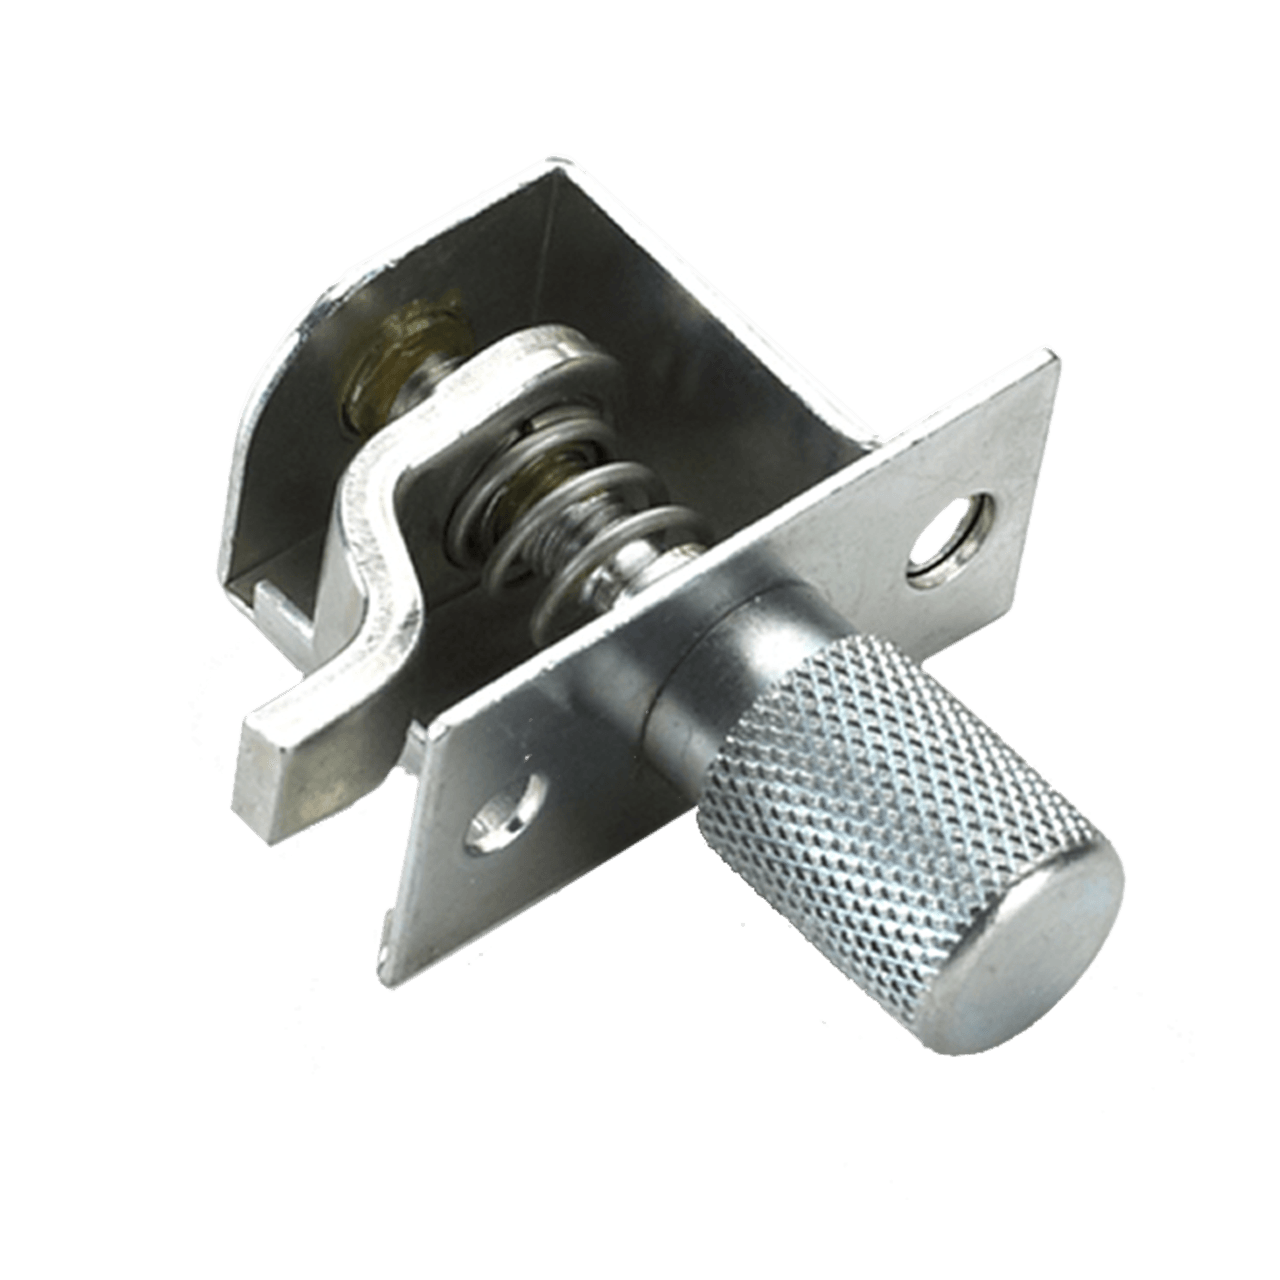 Stainless Steel Spring Loaded Pin Latch